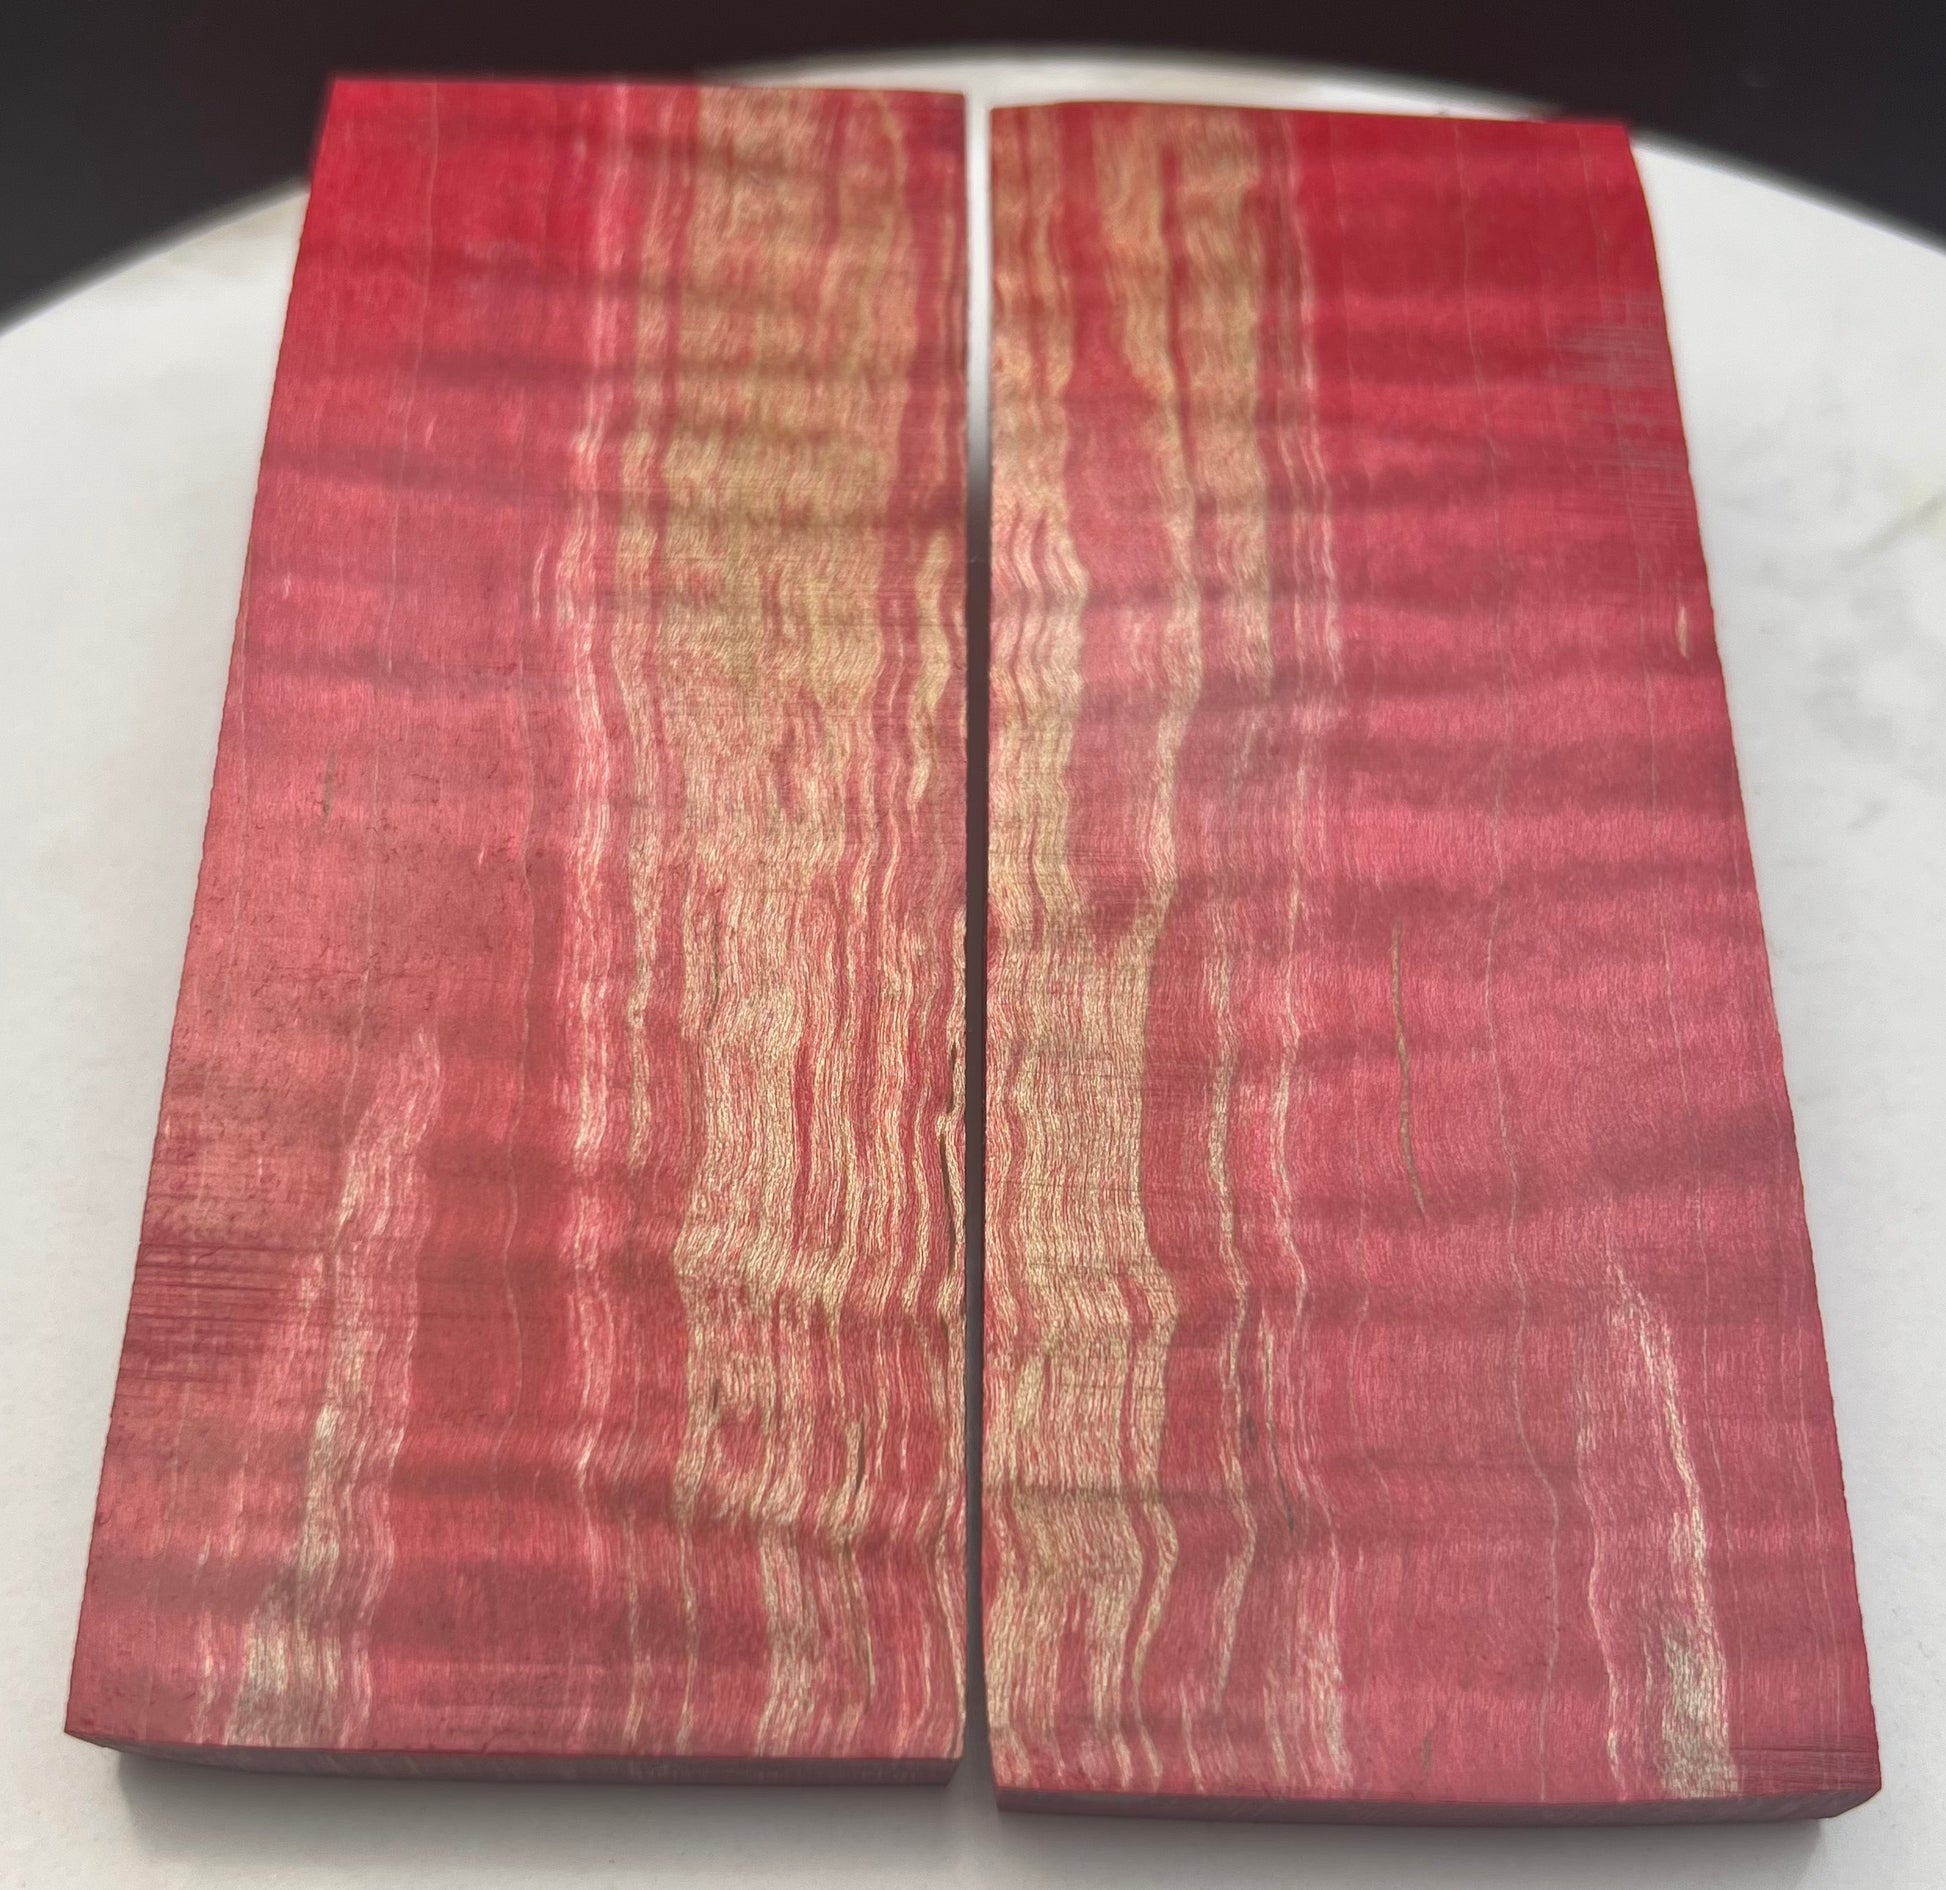 Stabilized Curly Maple knife Scales Bright Red